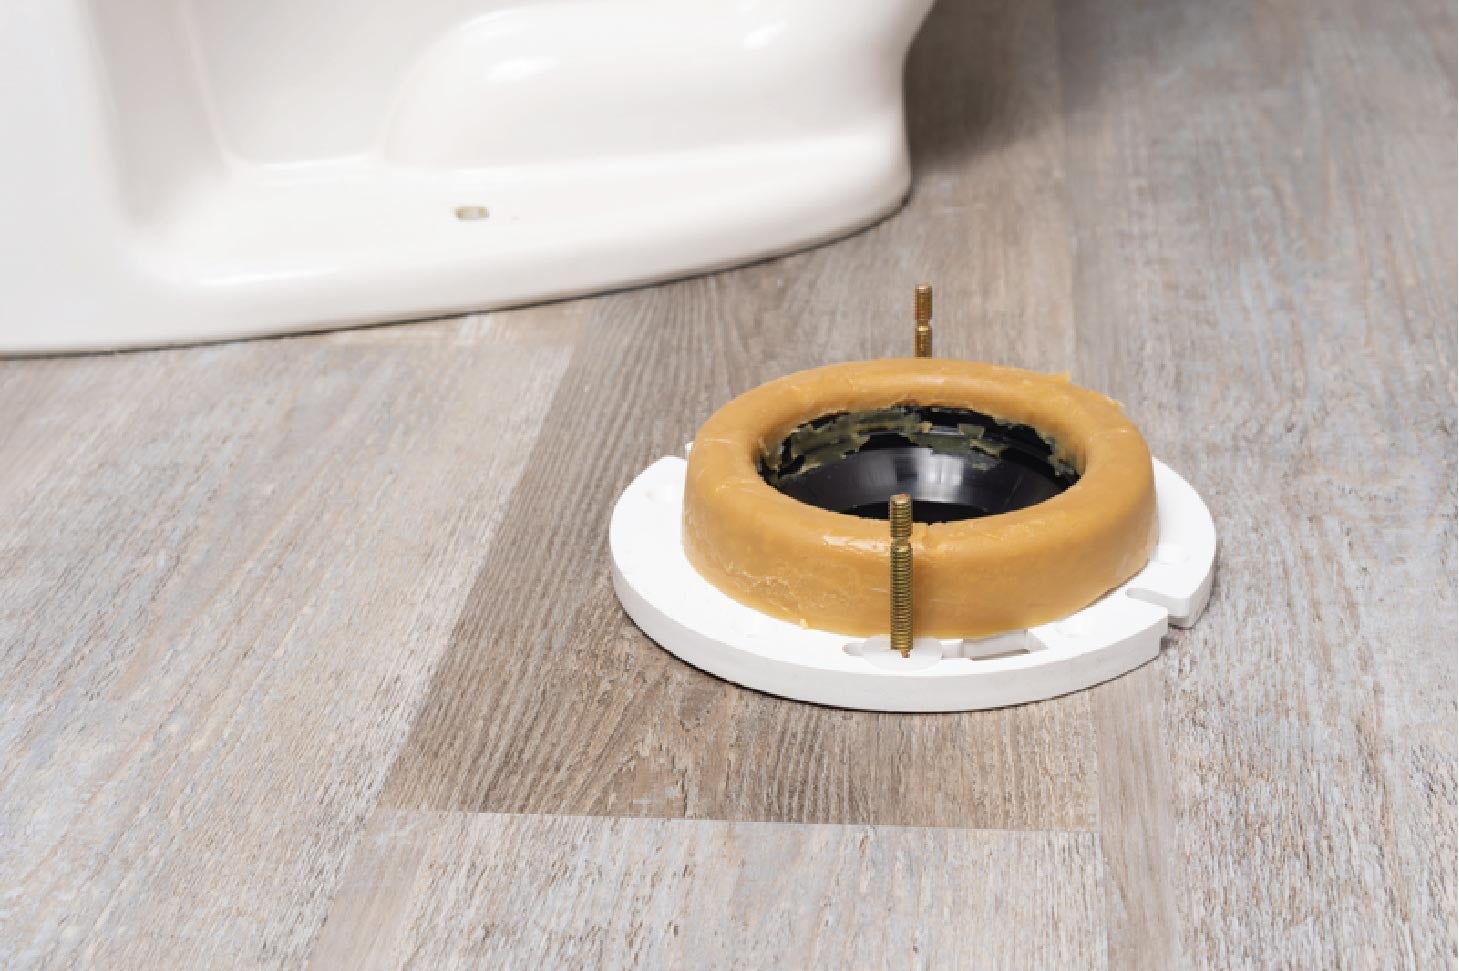 How To Install a New Toilet Flange